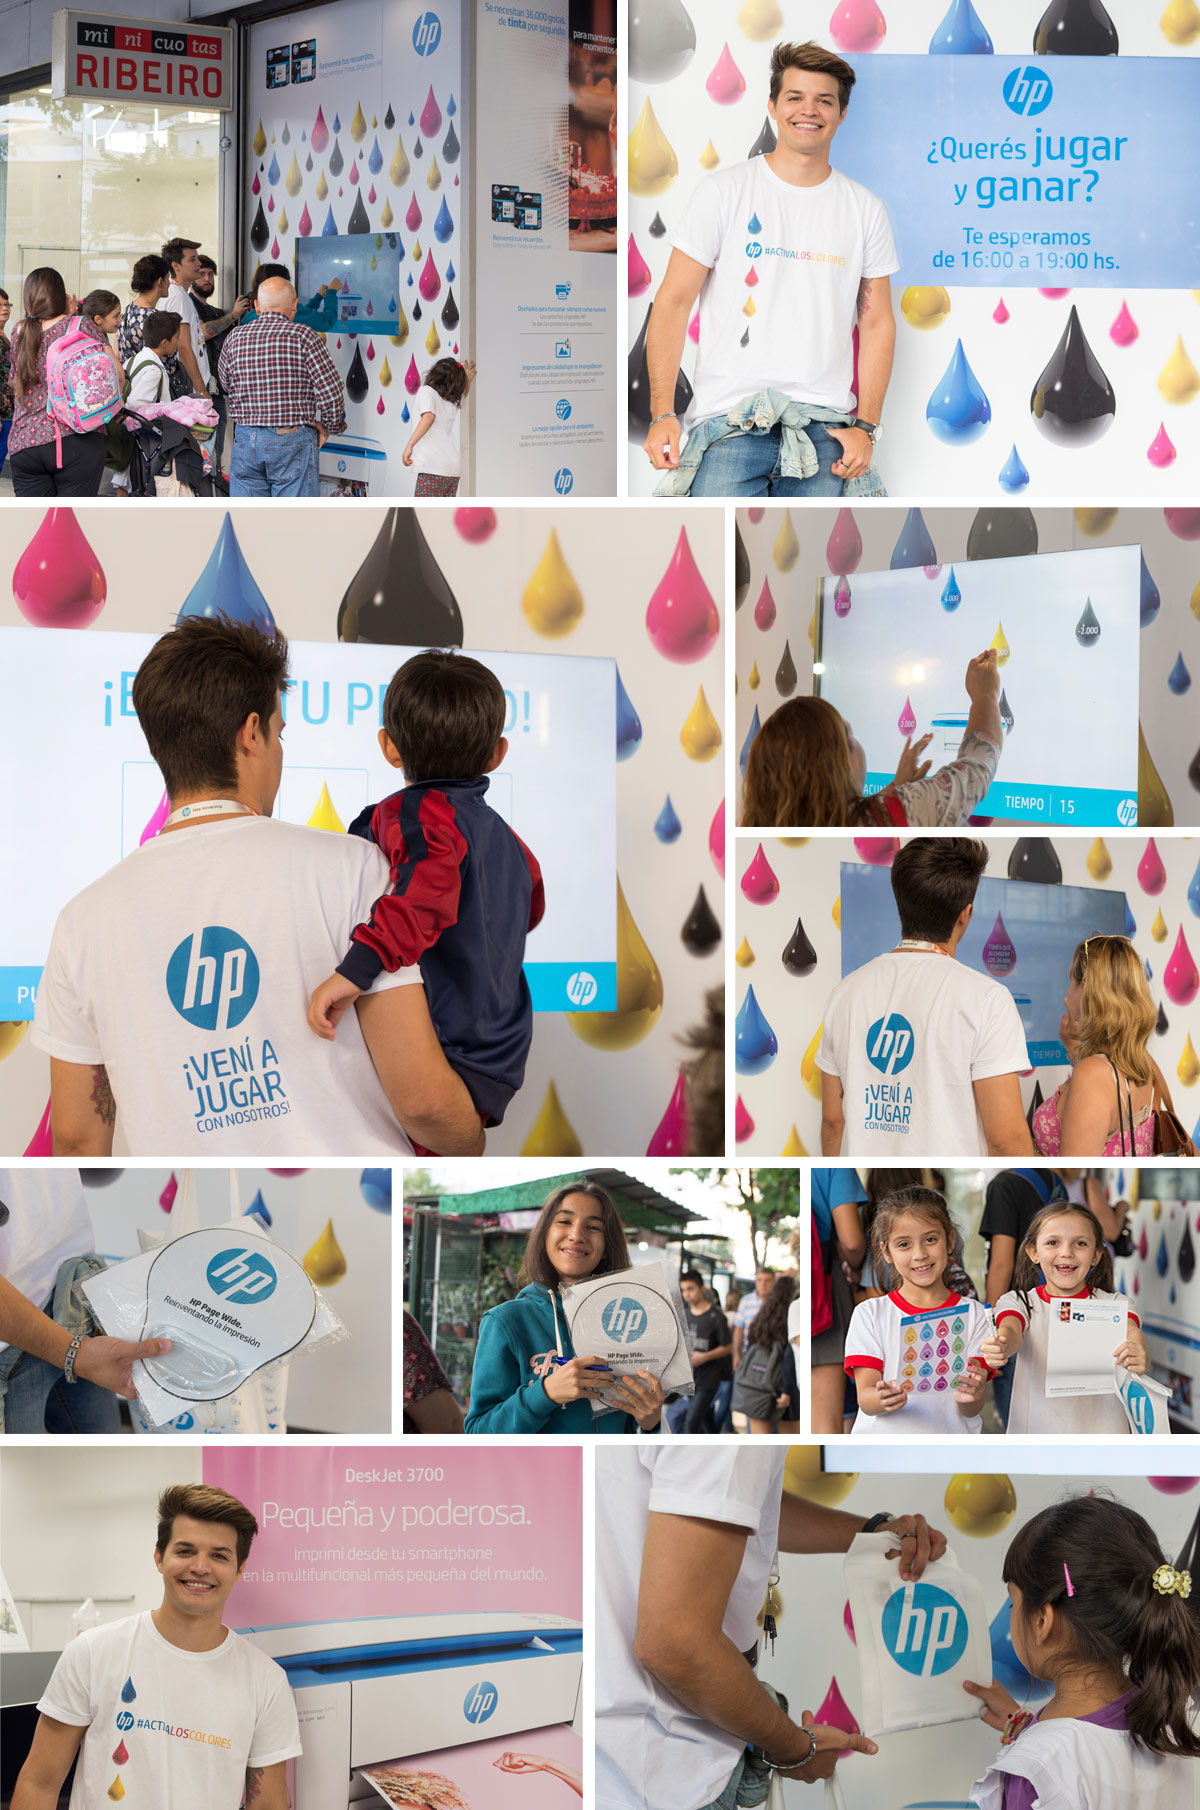 HP Inks Activation in Ribeiro Shop Windows